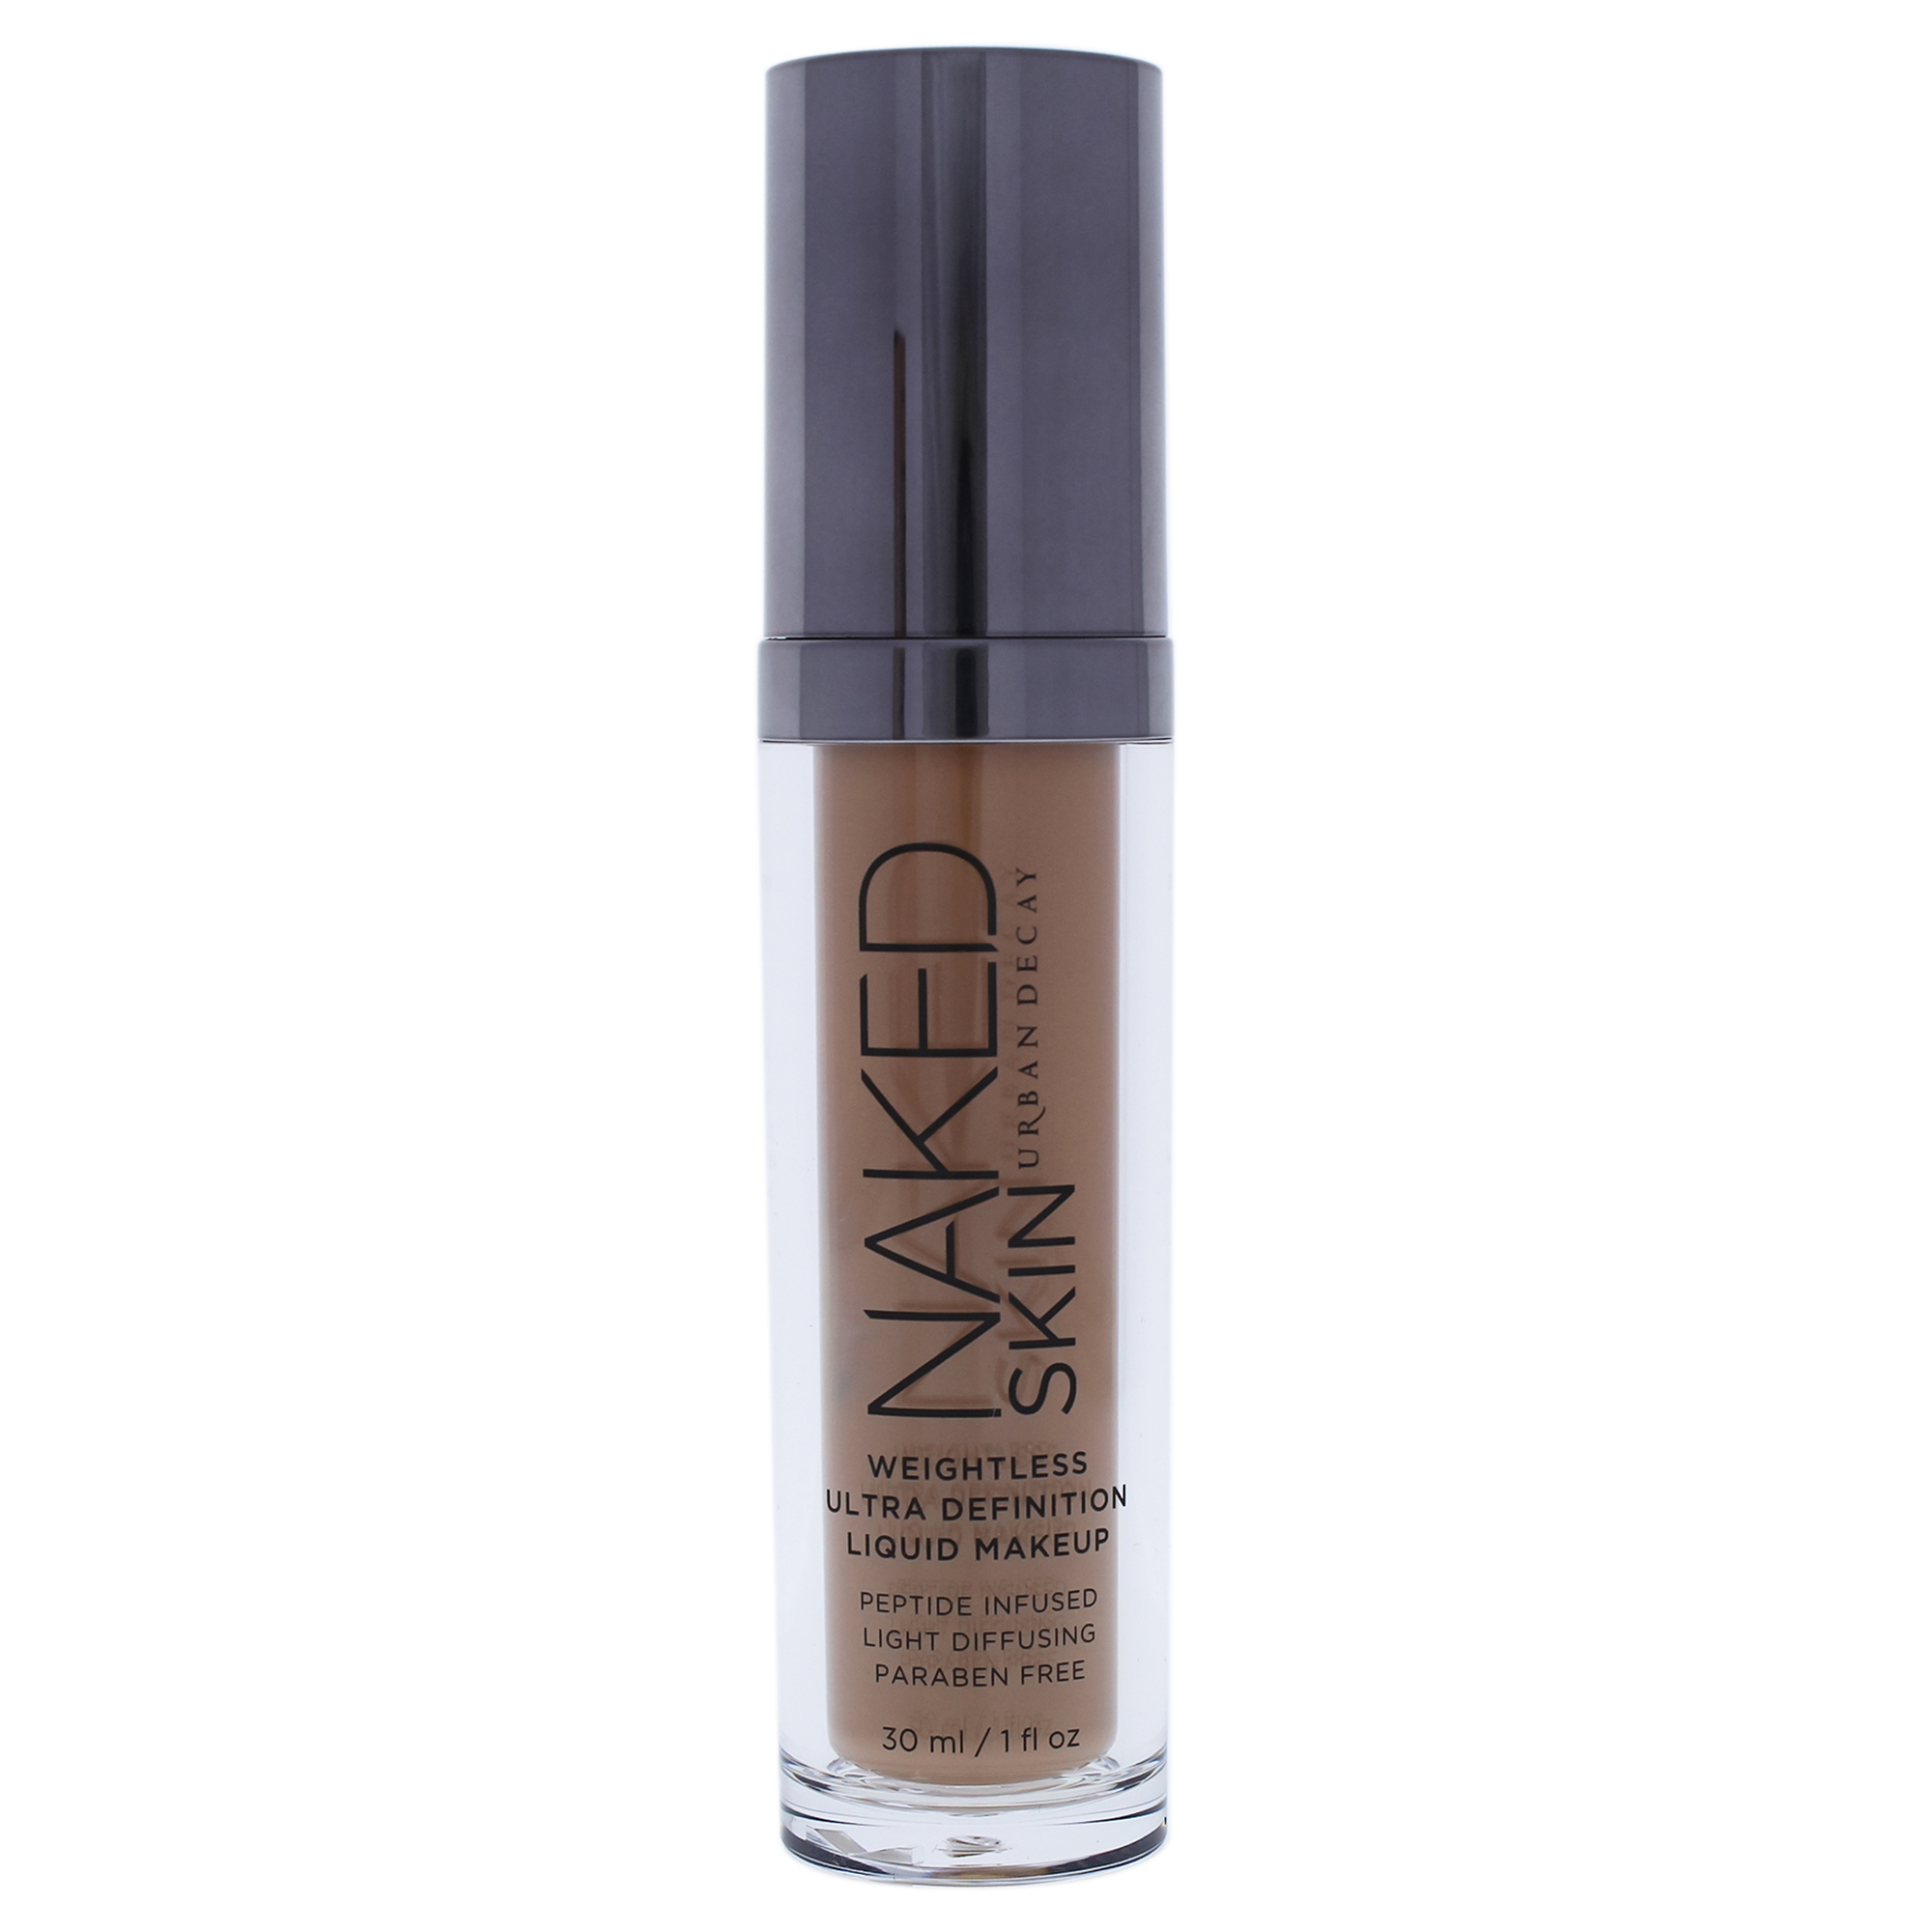 Naked Skin Weightless Ultra Definition Liquid Makeup - 3.5 by Urban Decay for Women - 1 oz Foundation - image 2 of 2